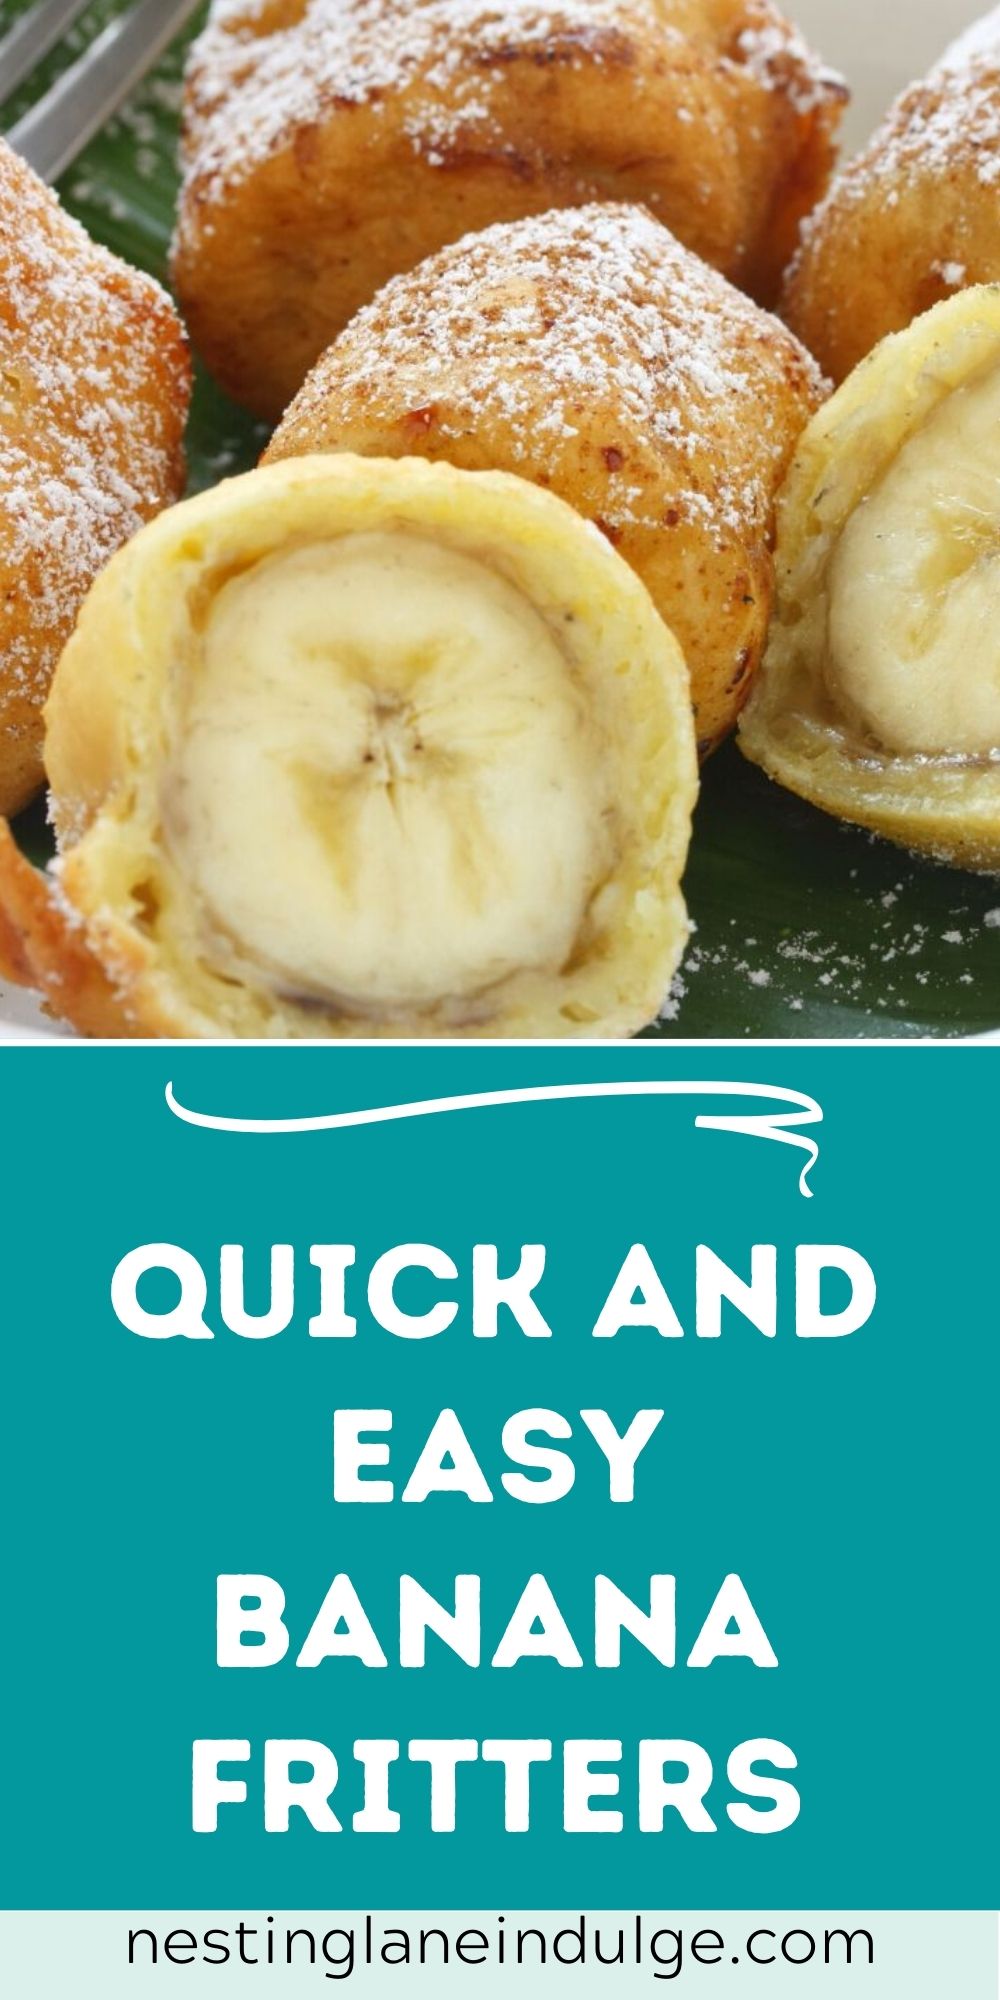 Graphic for Pinterest of Quick and Easy Banana Fritters Recipe for a Sweet Treat.